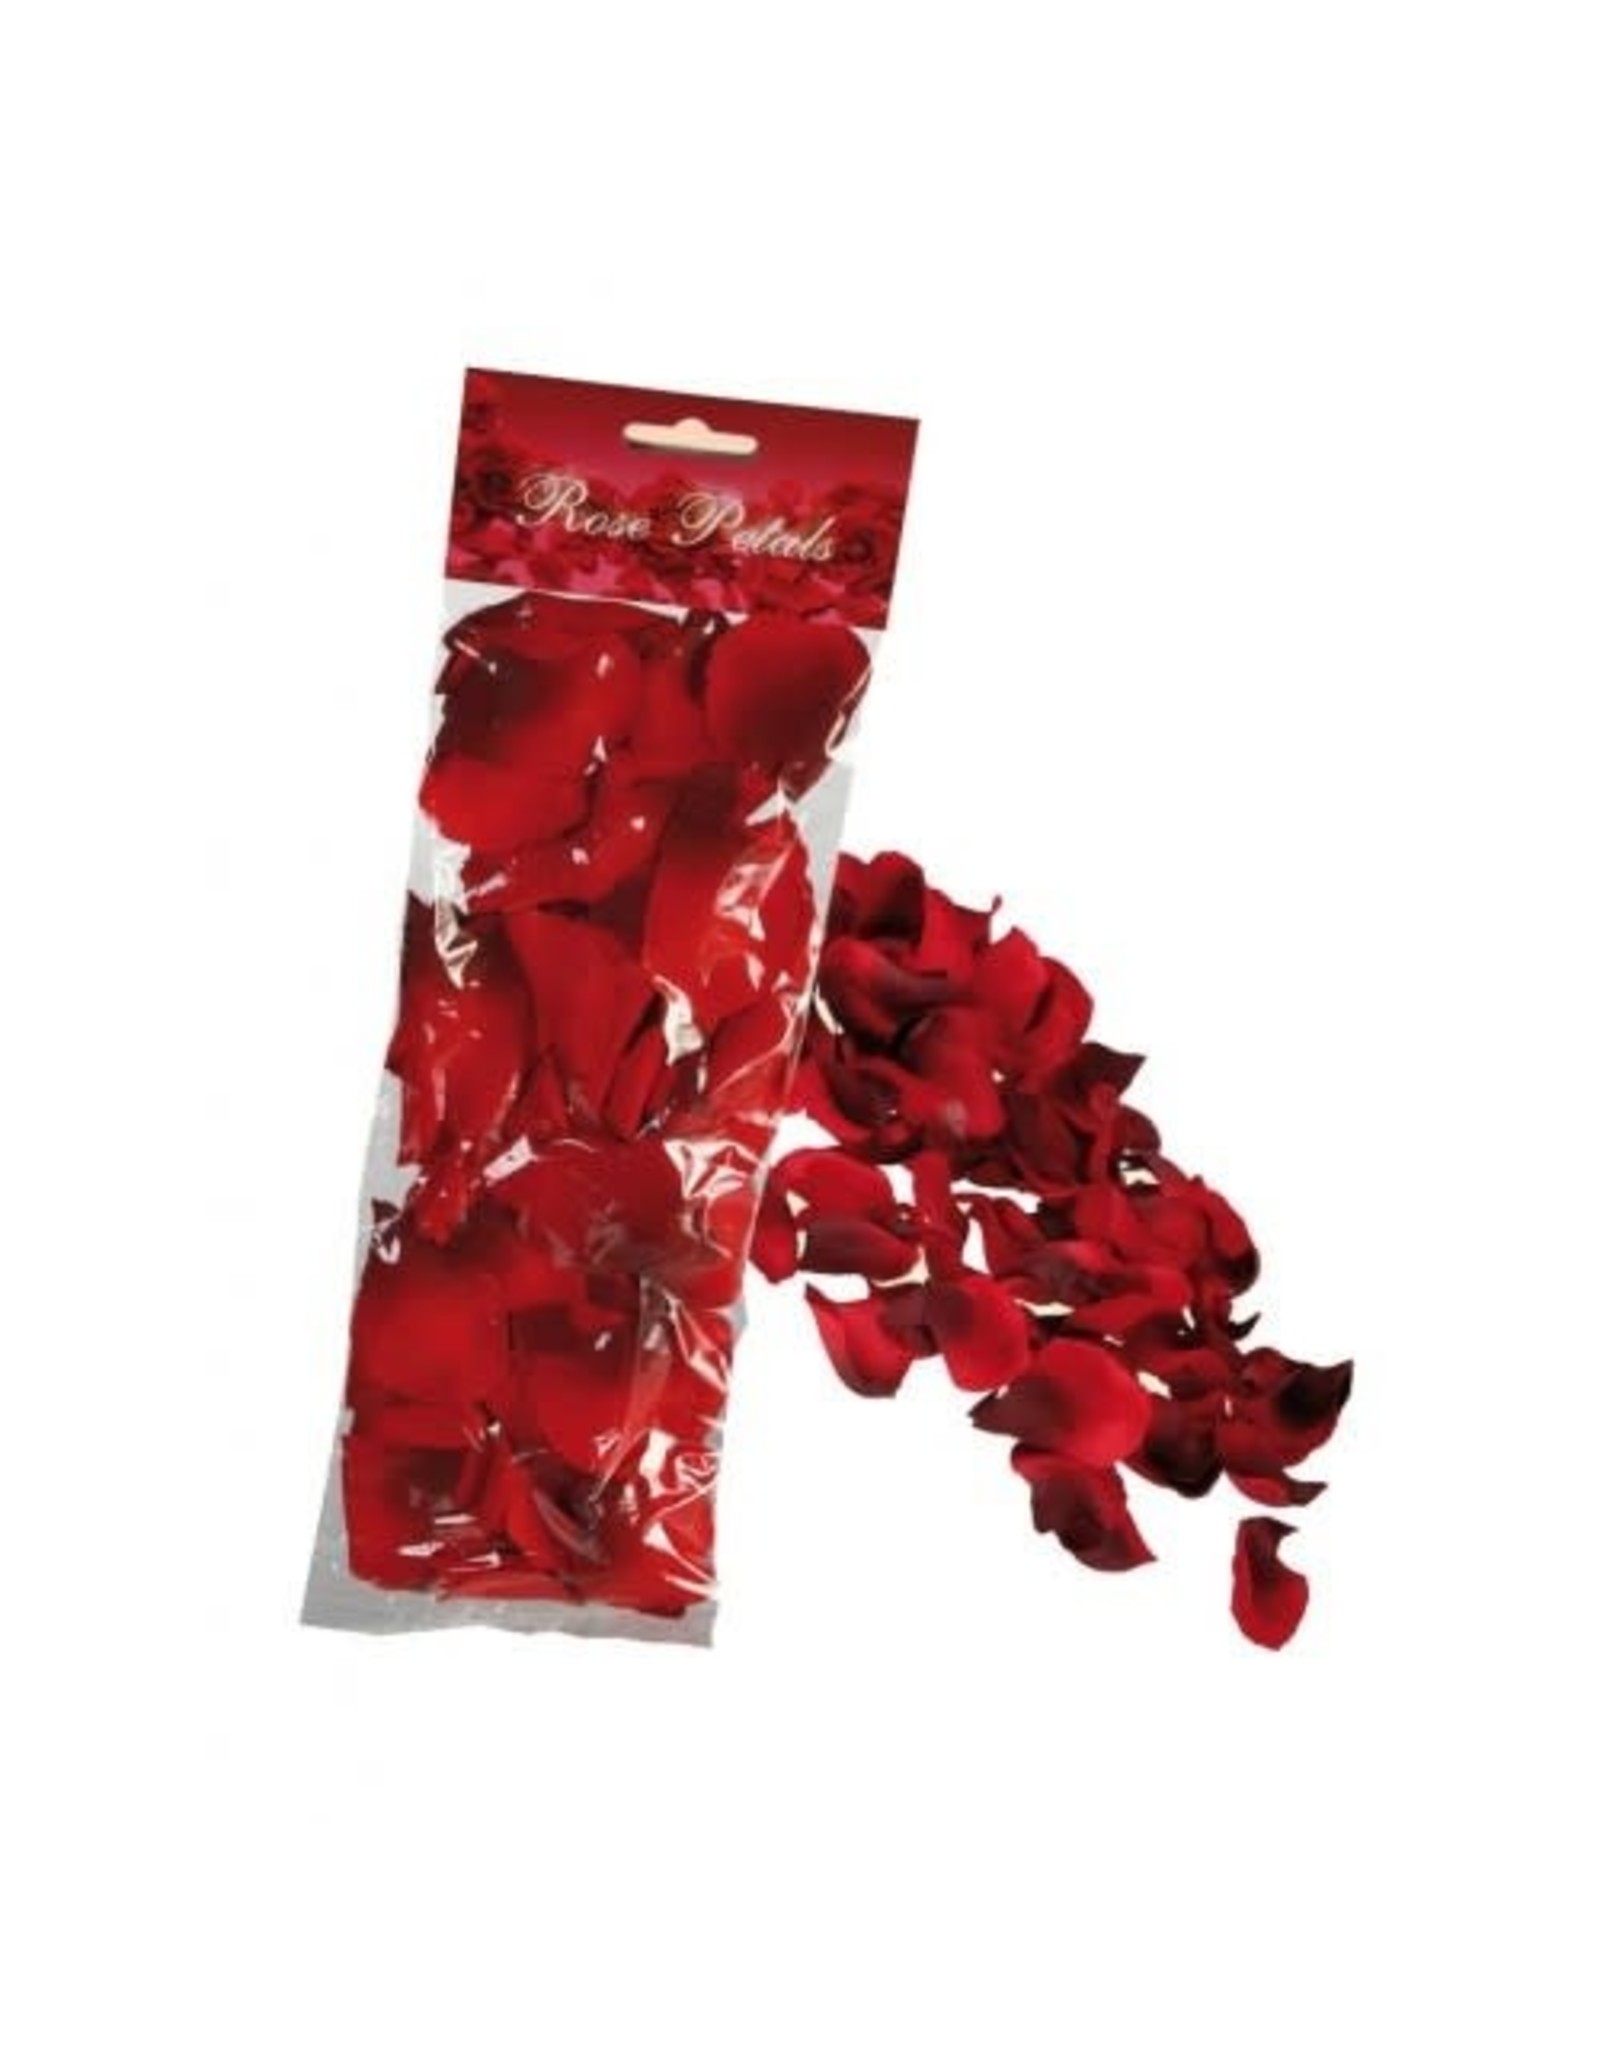 Jelly Jazz red rose petals